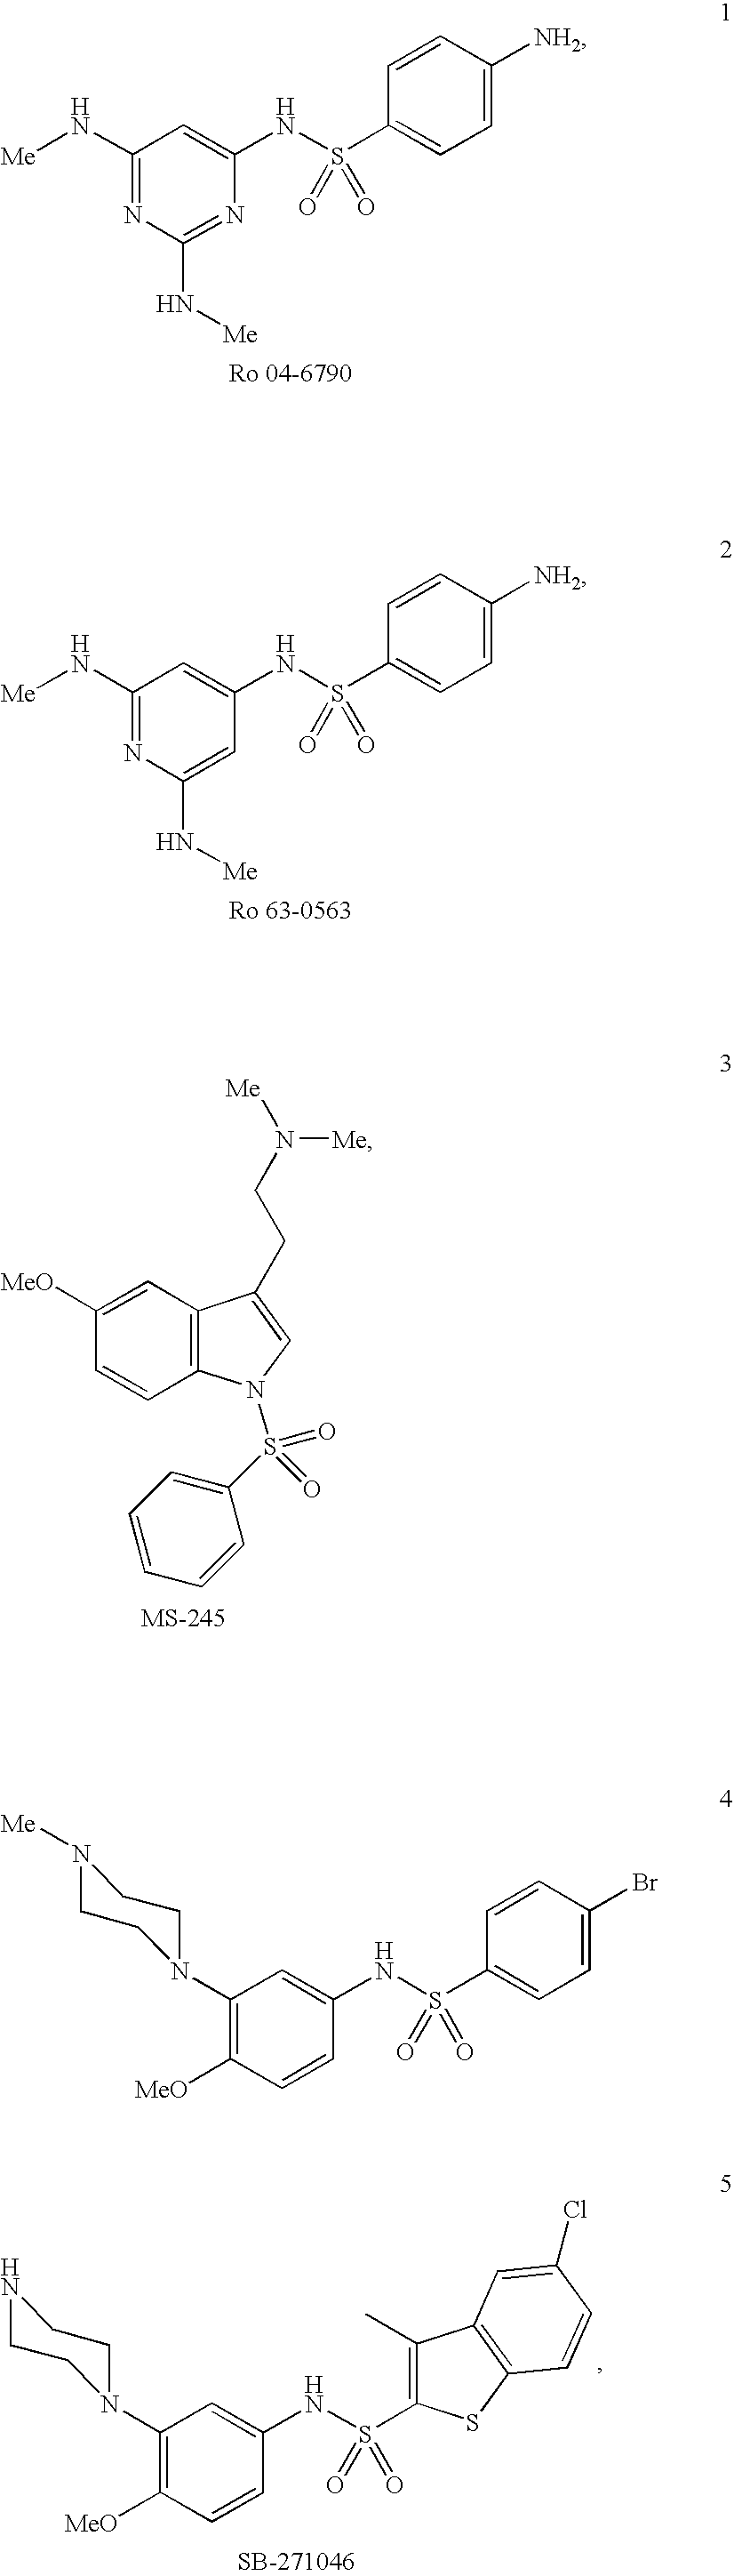 Novel substituted-1, 1-dioxo-benzo[1,2,4]thiadiazin-3ones, preparation method thereof, and pharmaceutical composition containing the same